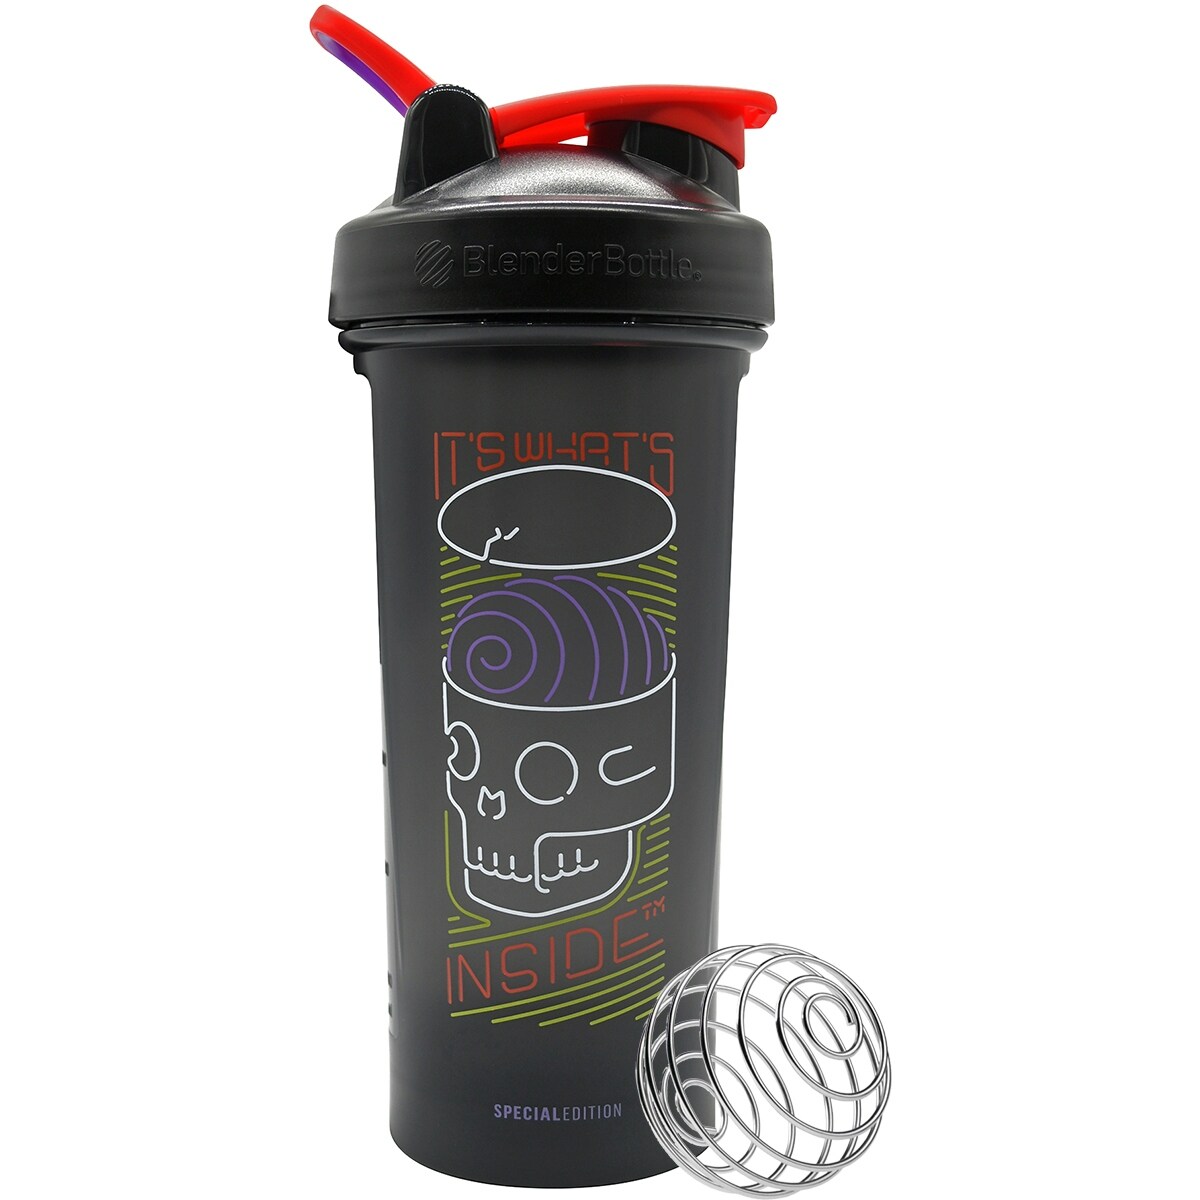 https://ak1.ostkcdn.com/images/products/is/images/direct/ede00c2f1491a8bd0303c64e82ebf35c16f1a97d/Blender-Bottle-Special-Edition-Classic-28-oz.-SpoutGuard-Shaker---Skull-Crusher.jpg